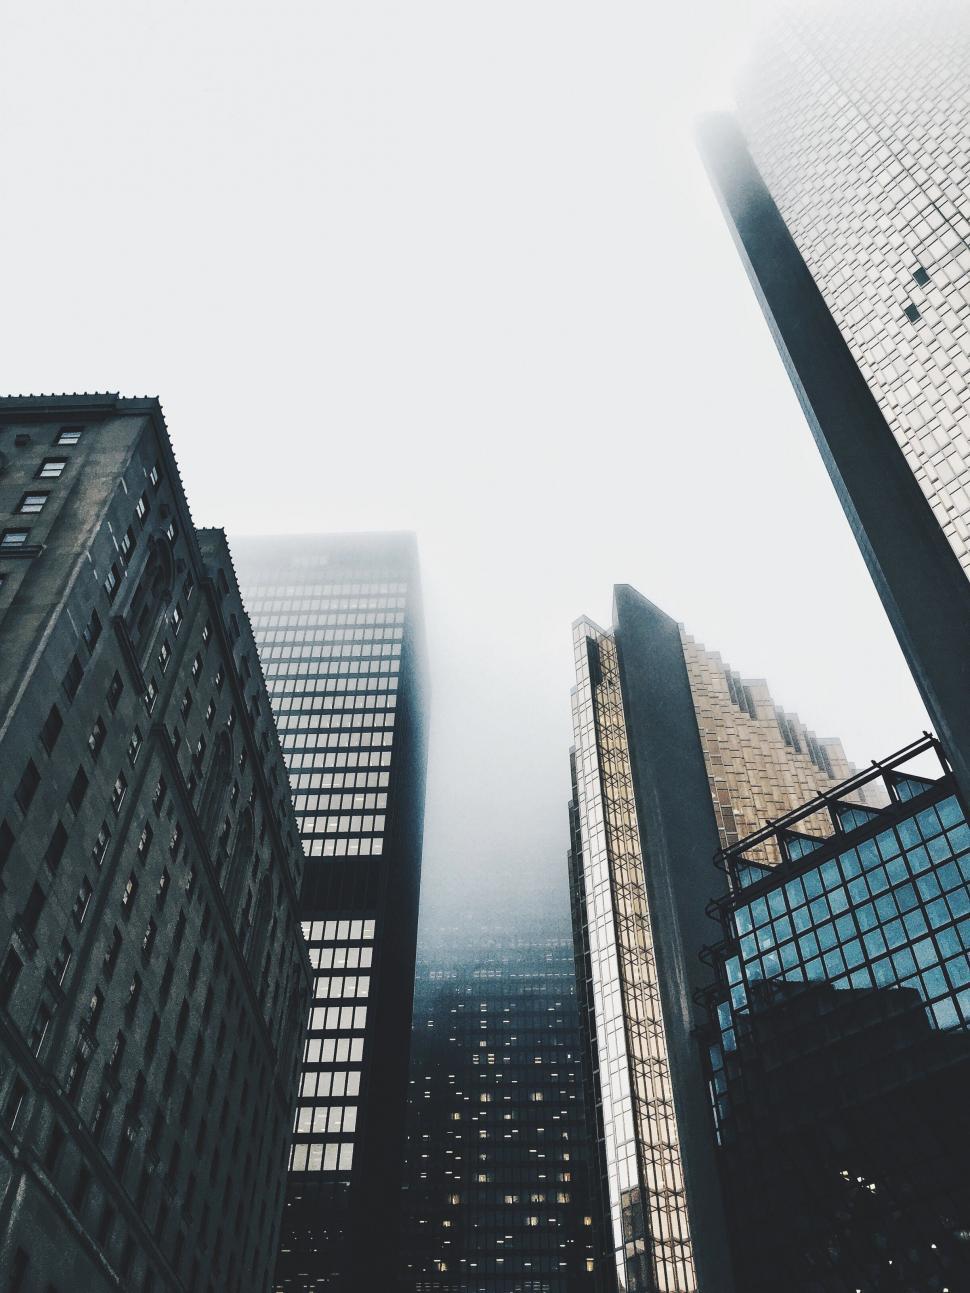 Free Image of Group of Tall Buildings Against Sky 